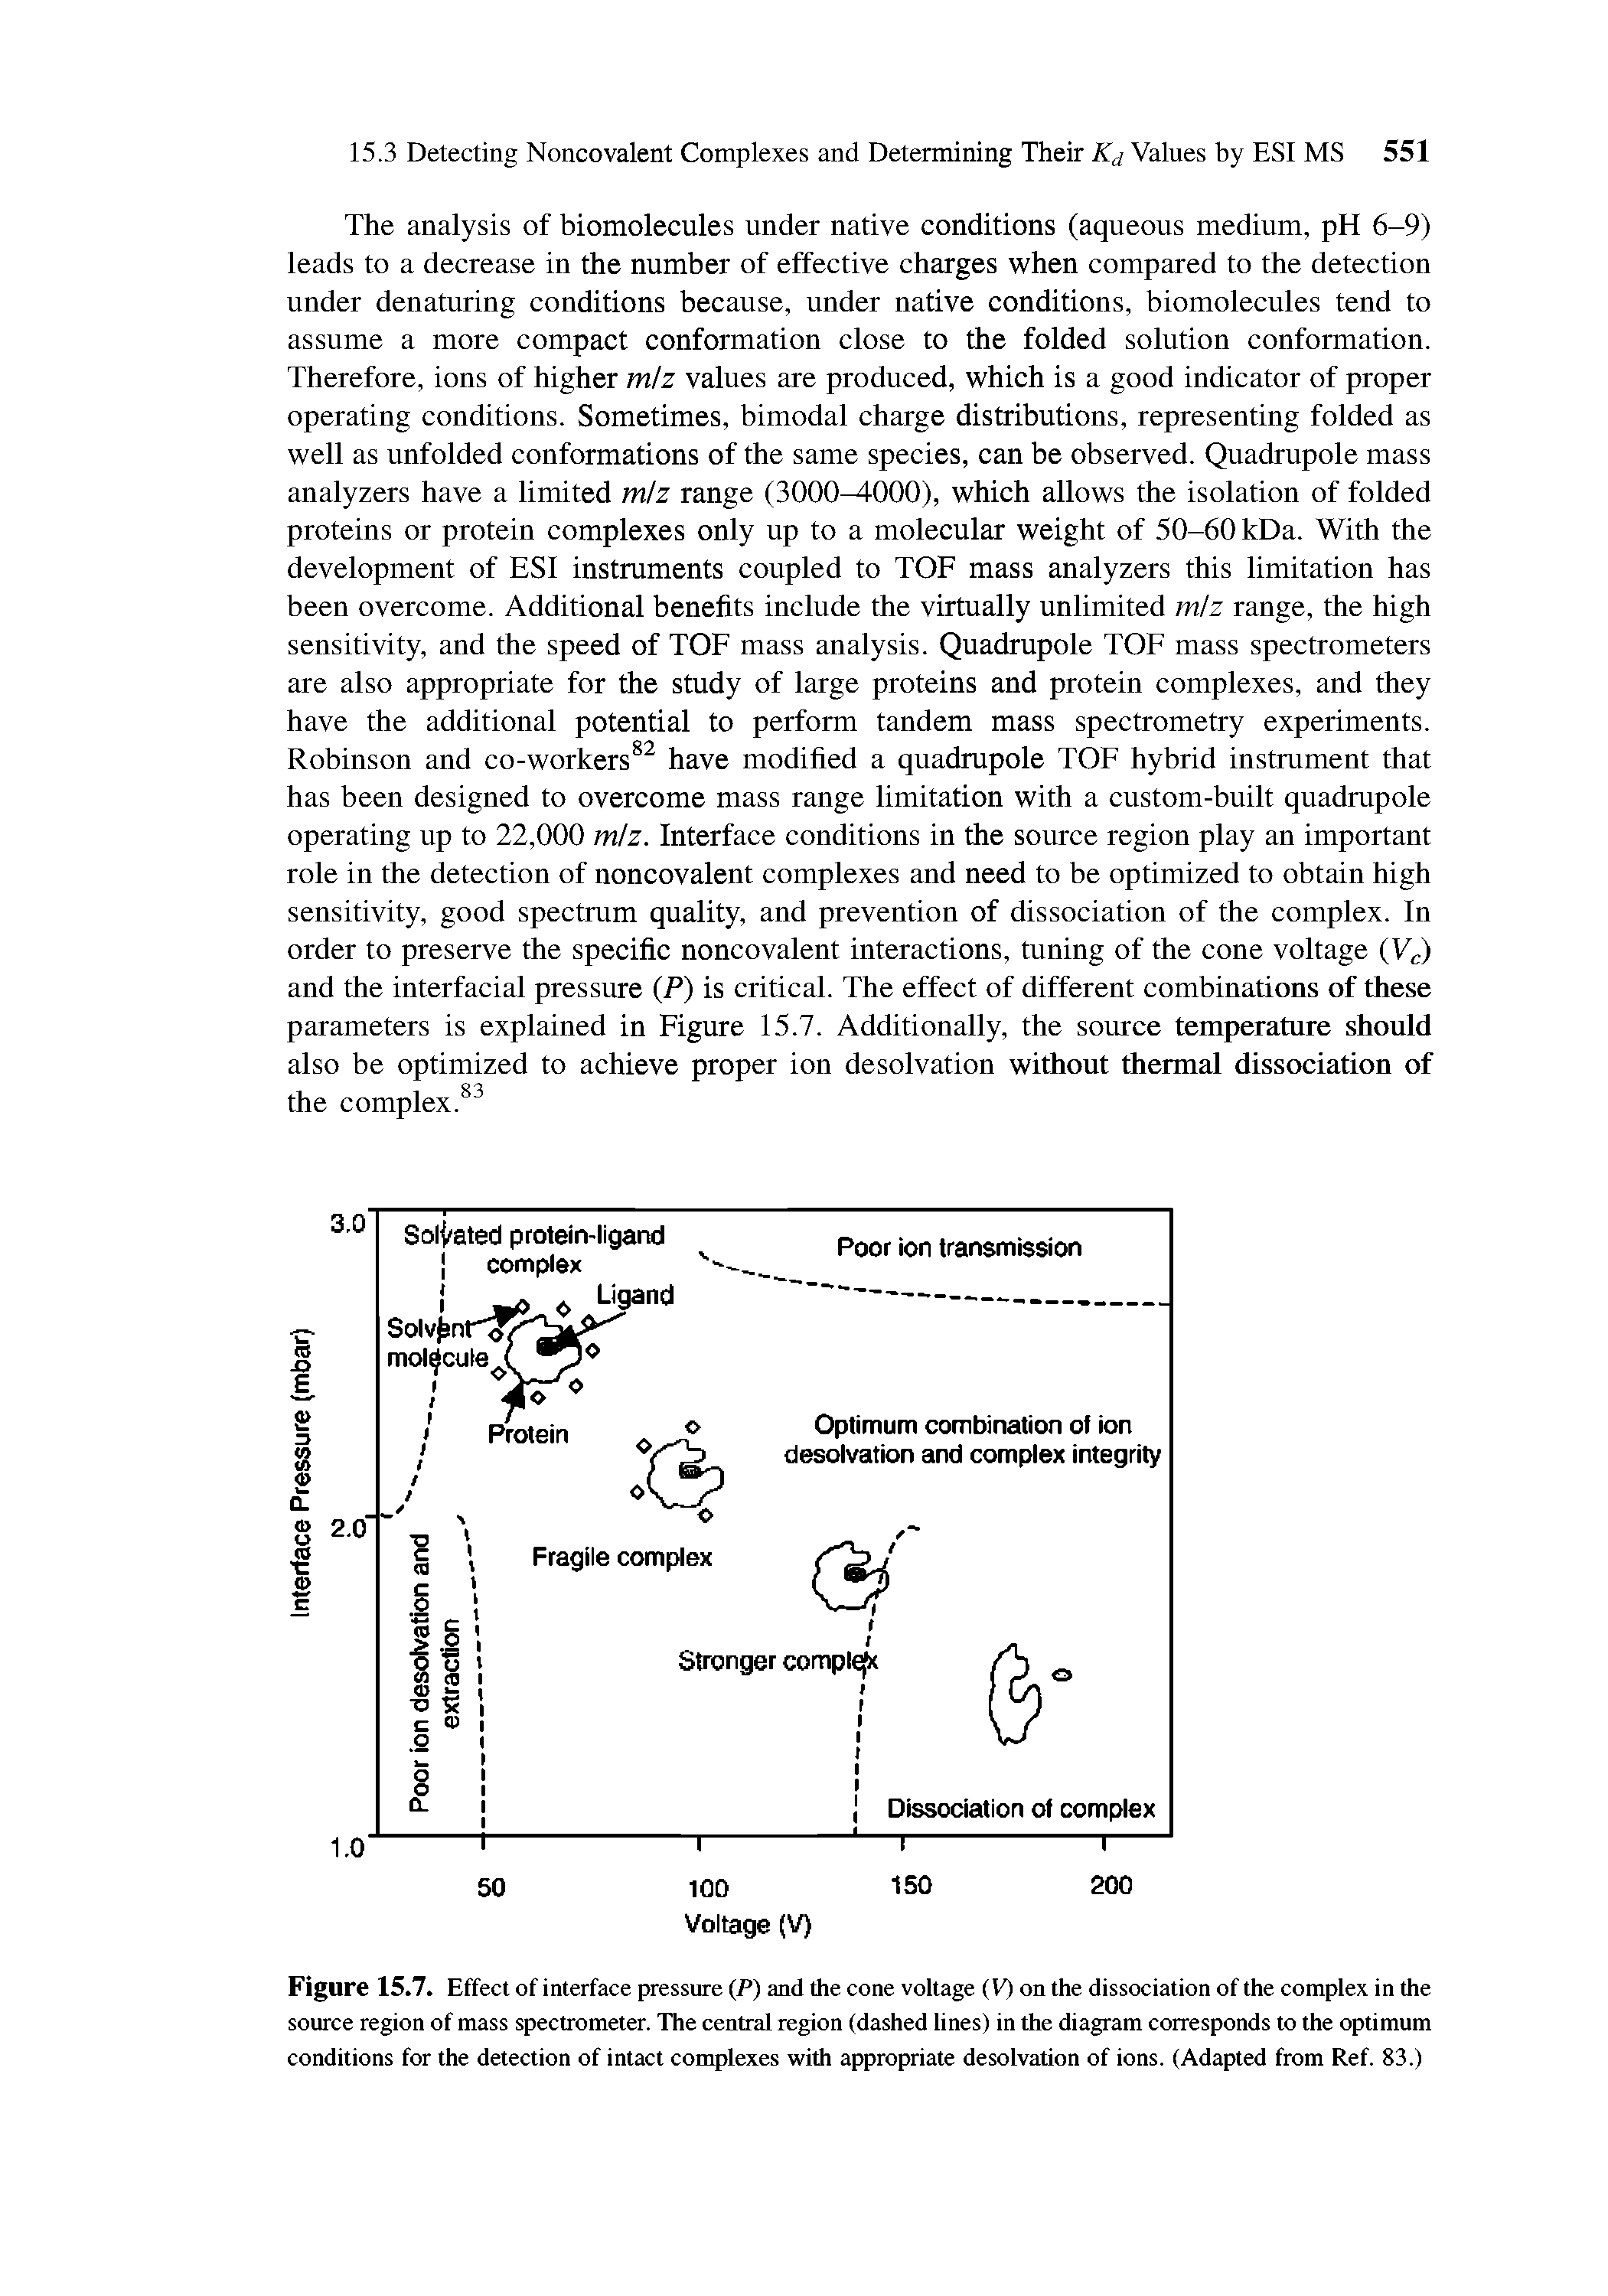 Figure 15.7. Effect of interface pressure (P) and the cone voltage (V) on the dissociation of the complex in the source region of mass spectrometer. The central region (dashed lines) in the diagram corresponds to the optimum conditions for the detection of intact complexes with appropriate desolvation of ions. (Adapted from Ref. 83.)...